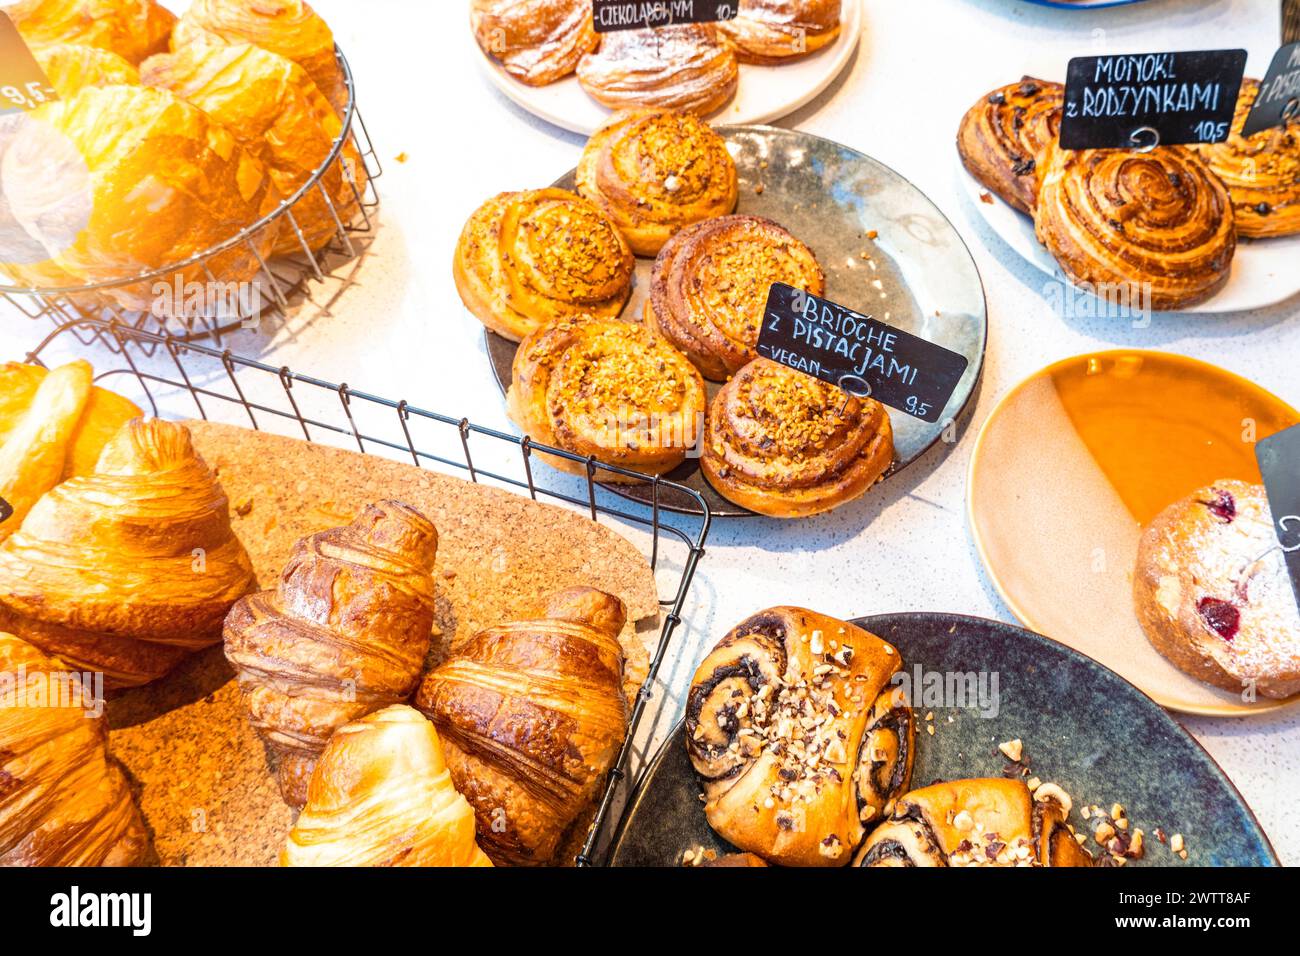 Assorted pastries on display at a cozy bakery Stock Photo